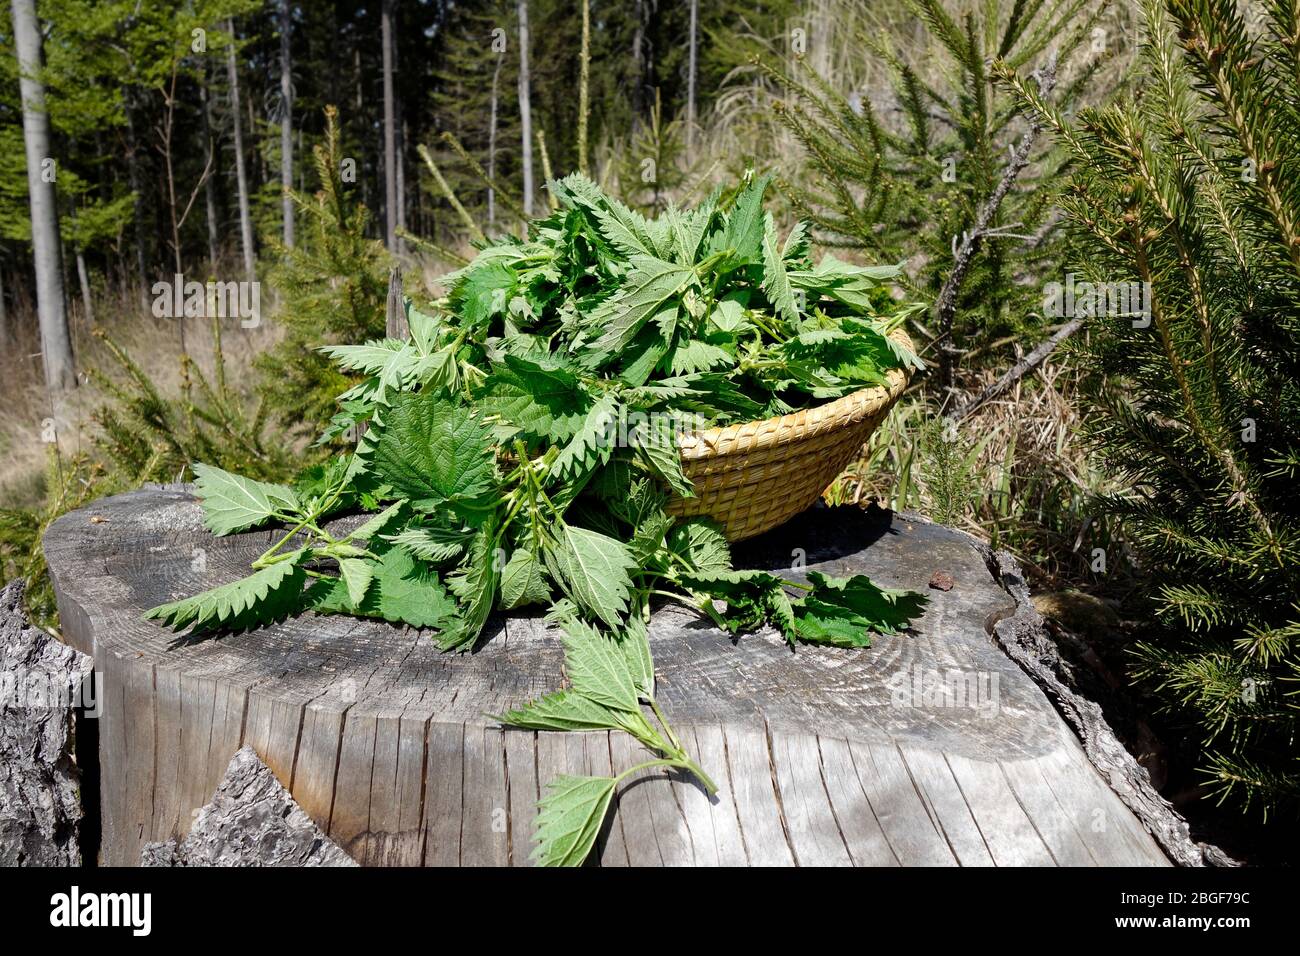 Edible wild foraged fresh Stinging nettle  (Urtica dioica), in vicker basked with mountain ambient in background. Stock Photo